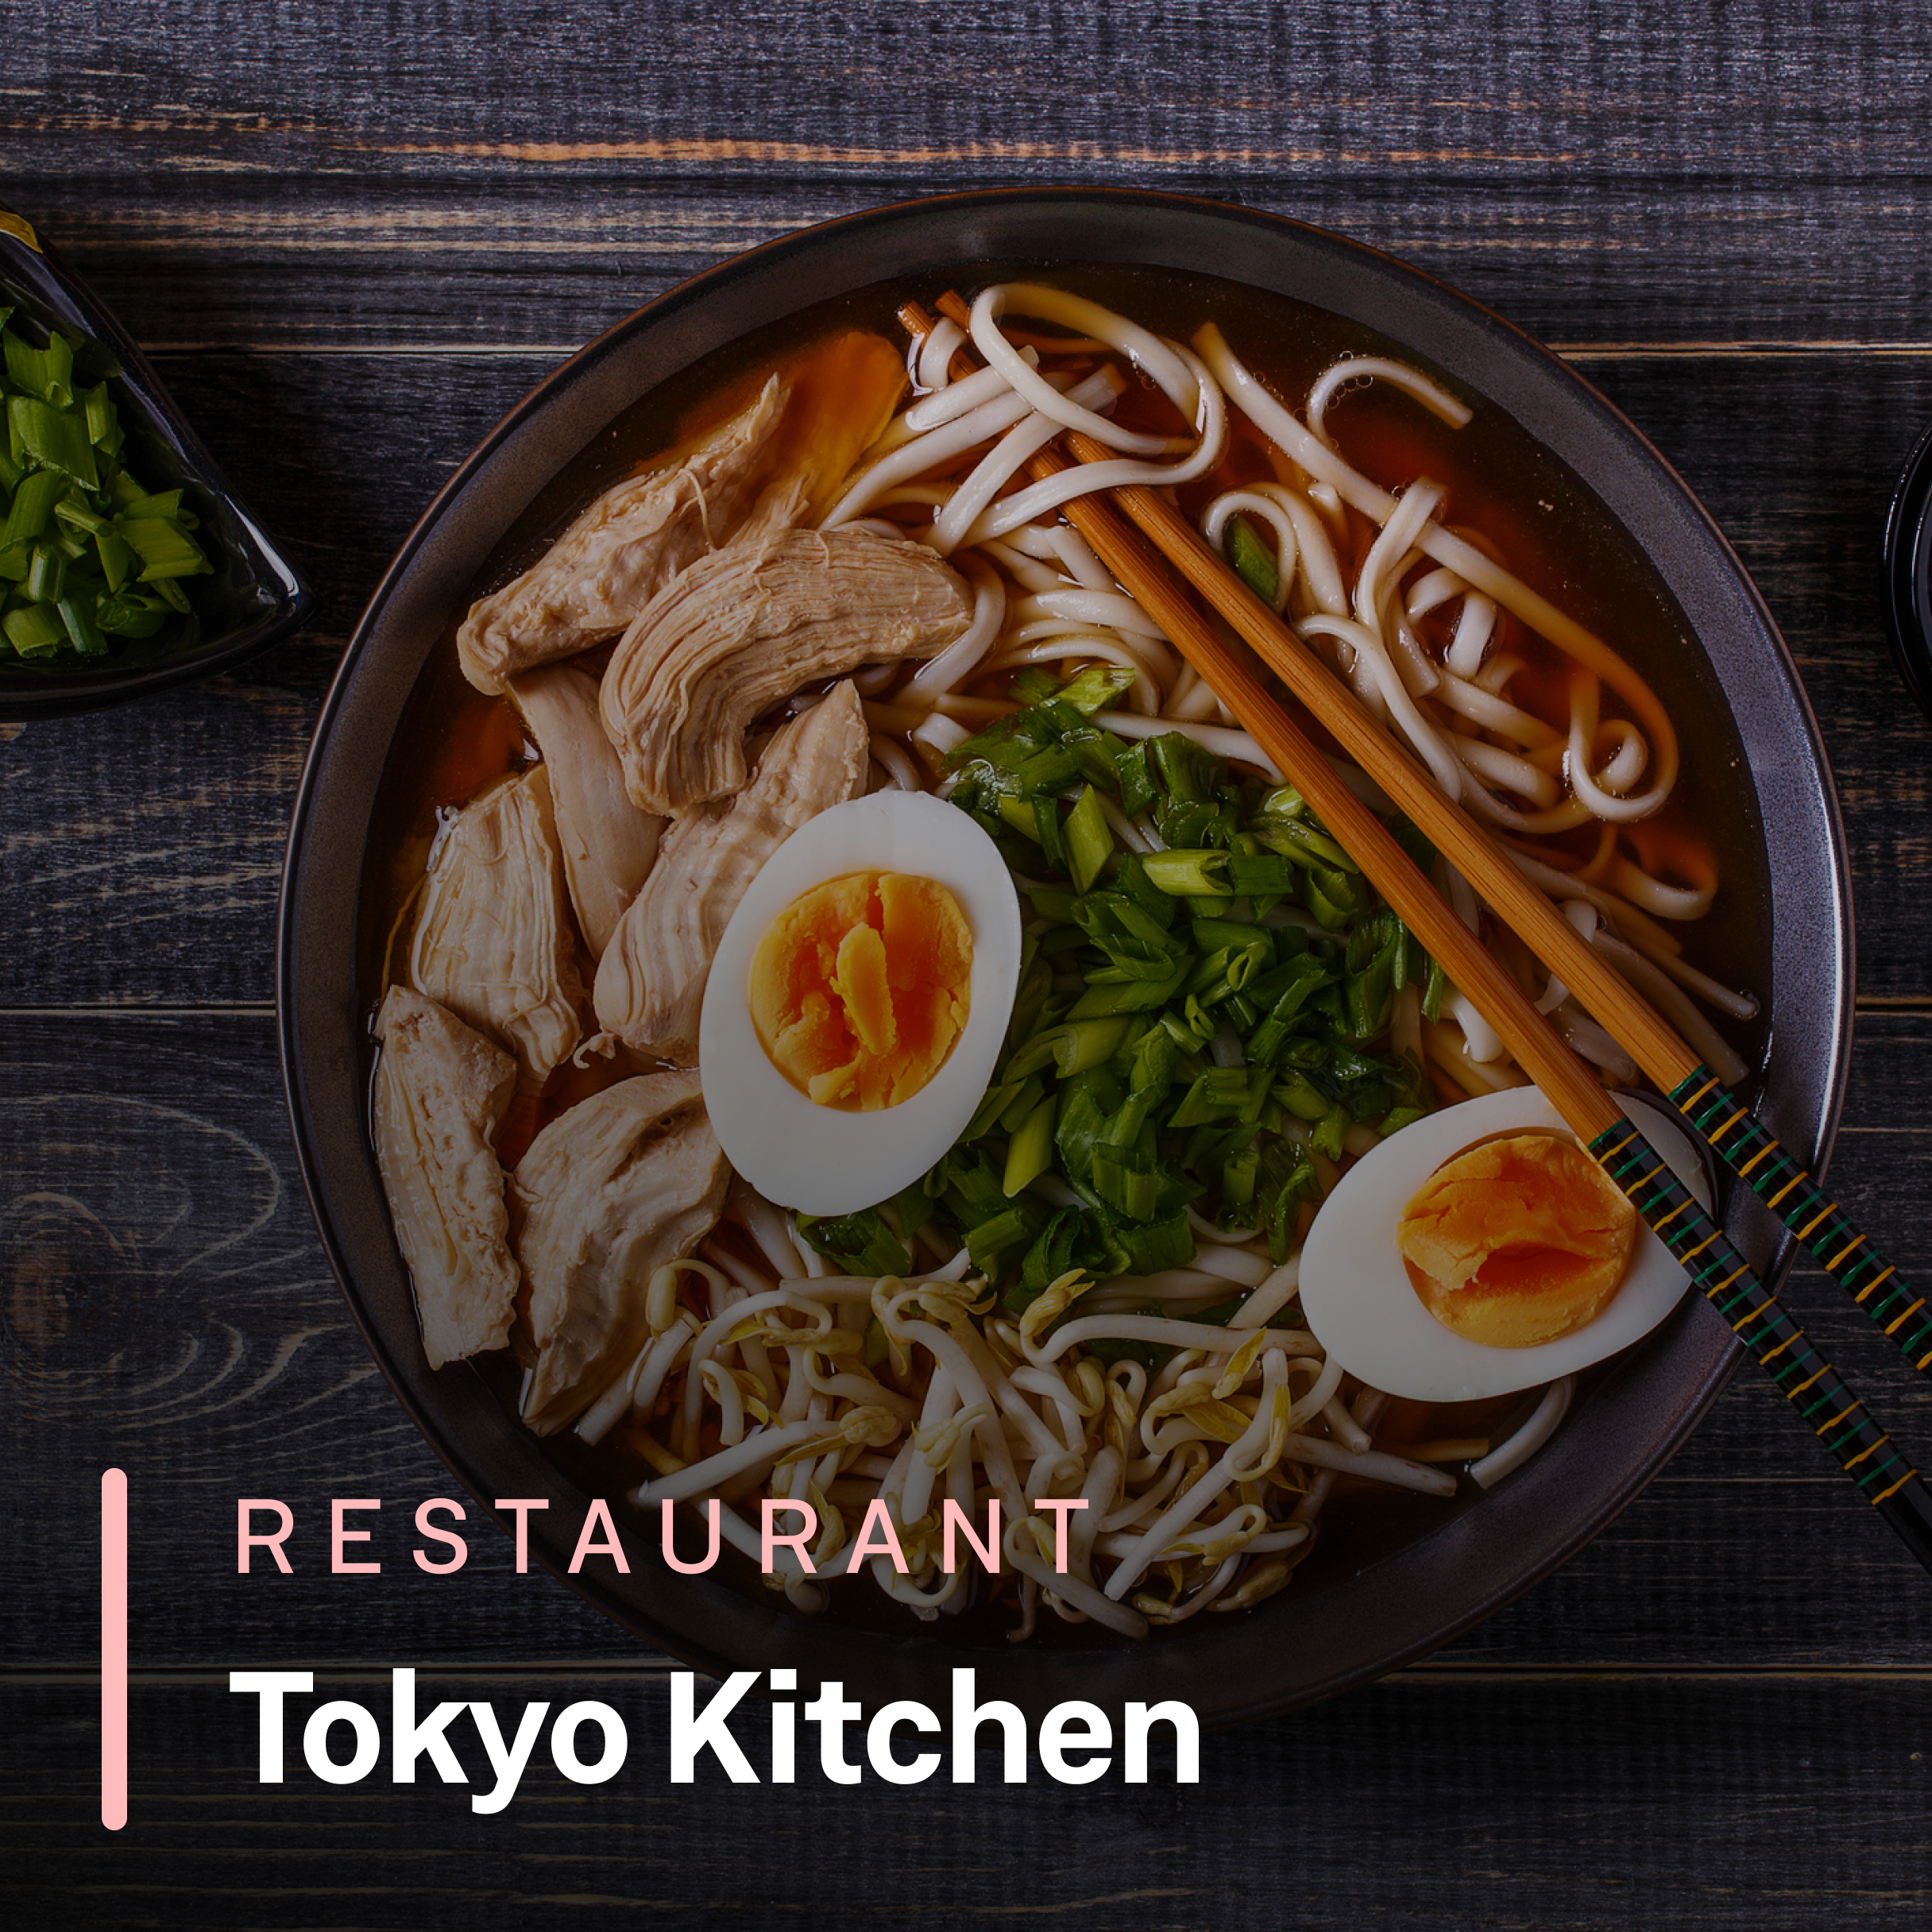 Tokyo Kitchen serves up a satisfying selection of J-Pop for the modern Japanese kitchen.